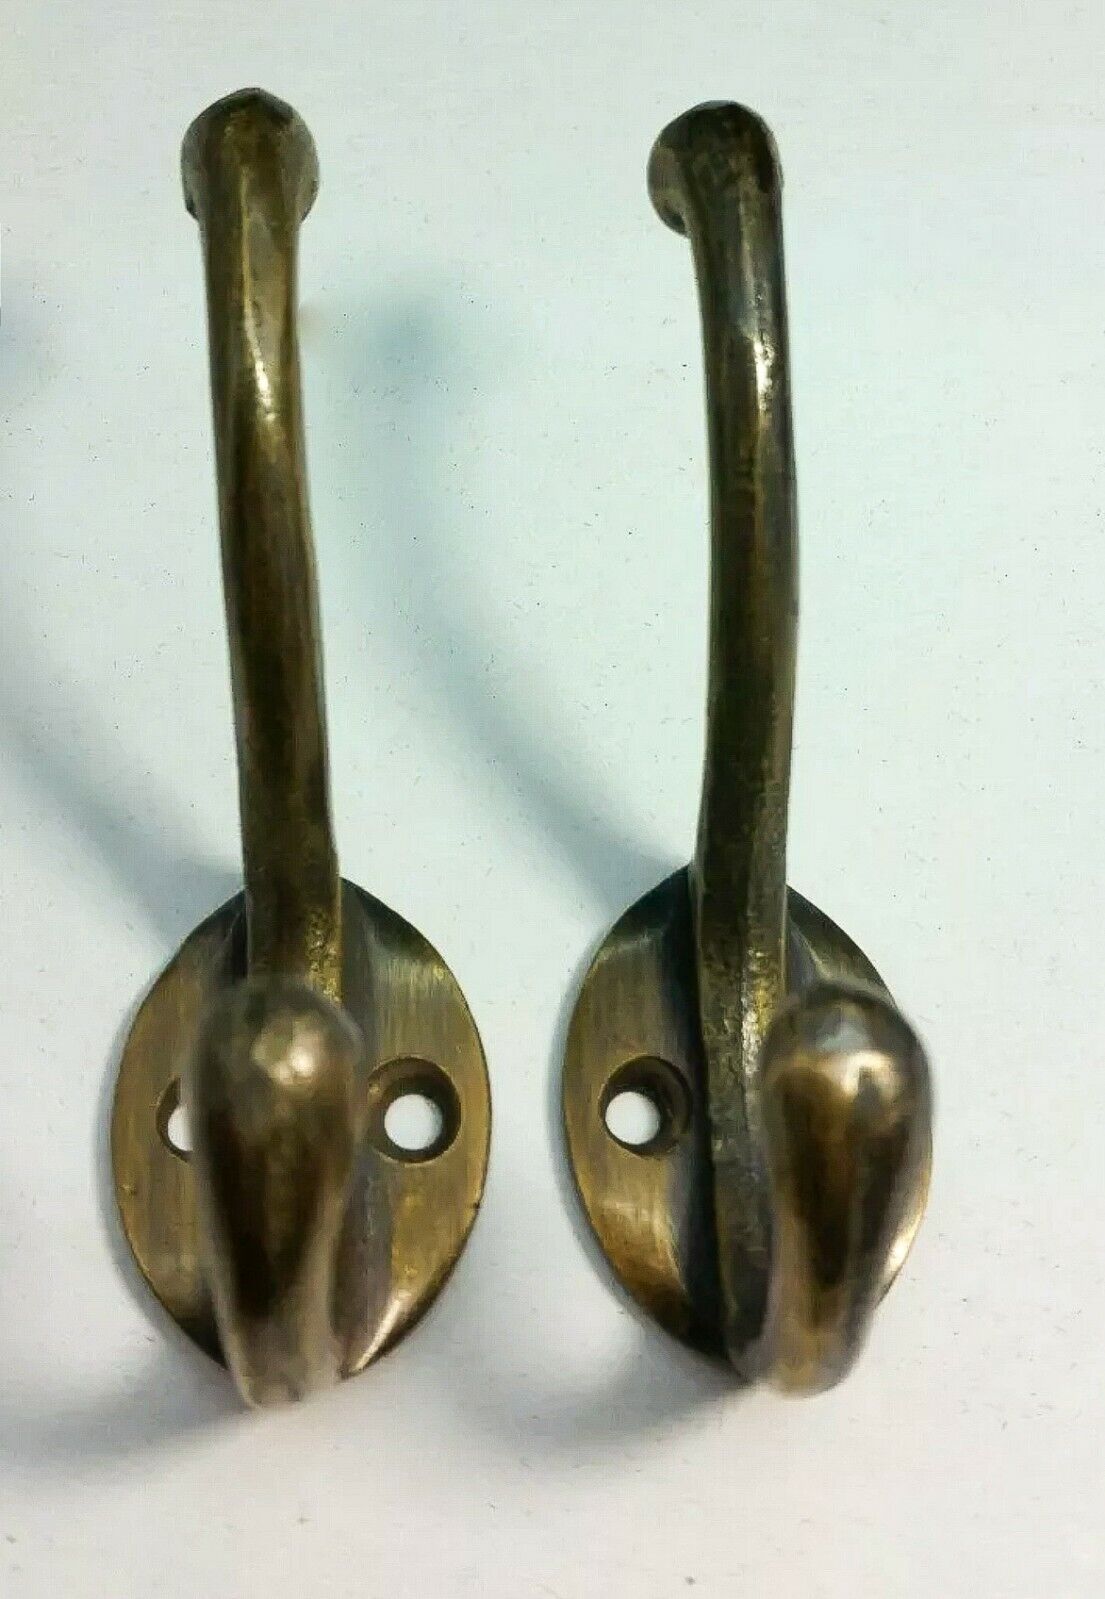 2 Solid Antique Brass Double Coat Hooks w. Oval Backplate 3" x 2"  #C9